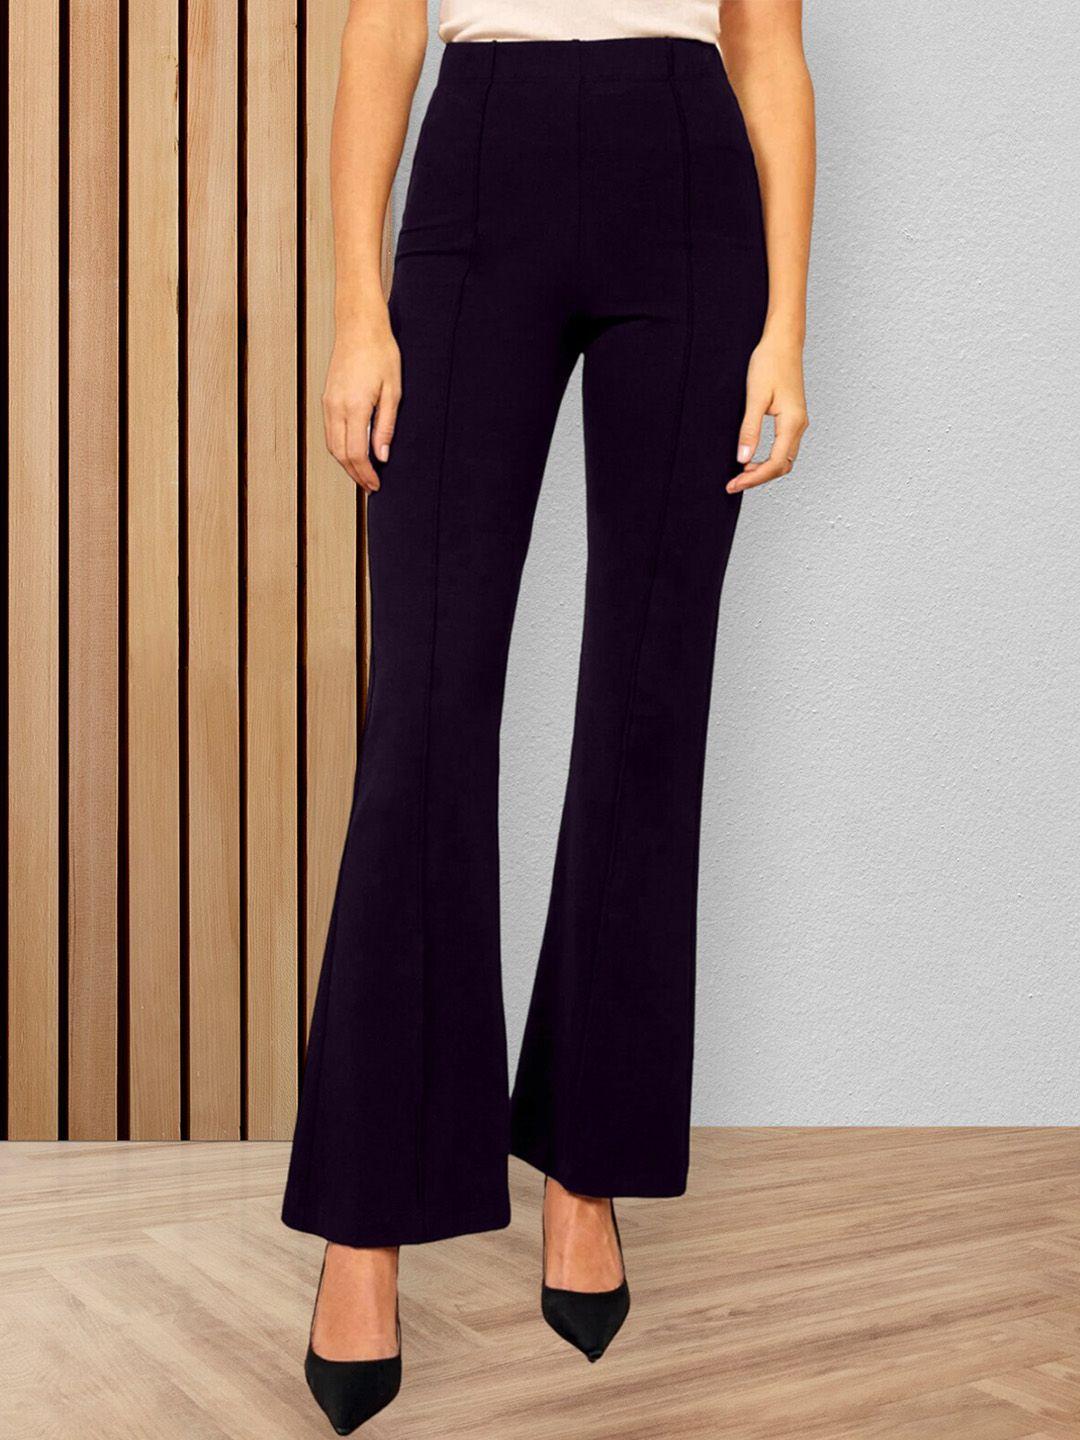 fabflee women flared high-rise pleated trousers